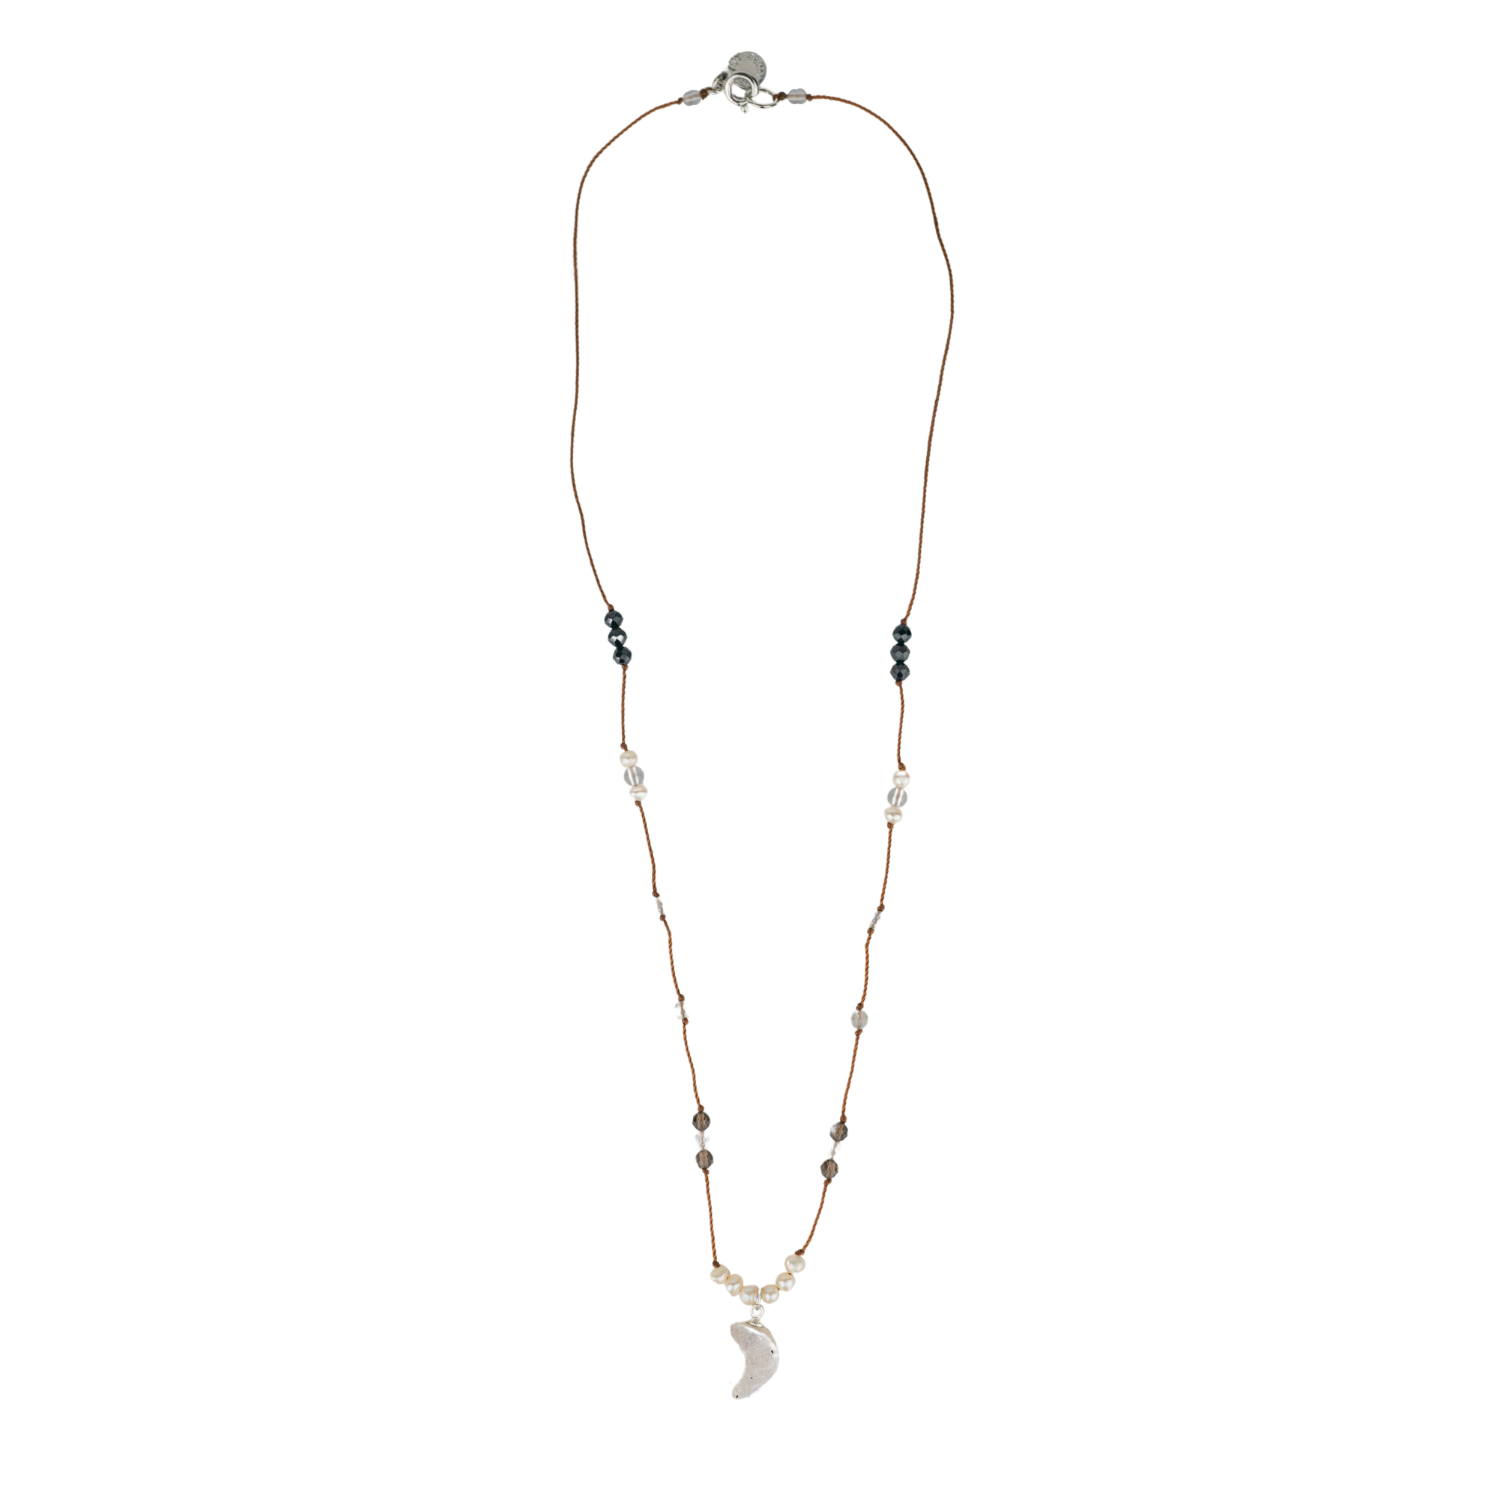 Moon Magic Necklace, Shop Moon Jewelry at Energy Muse